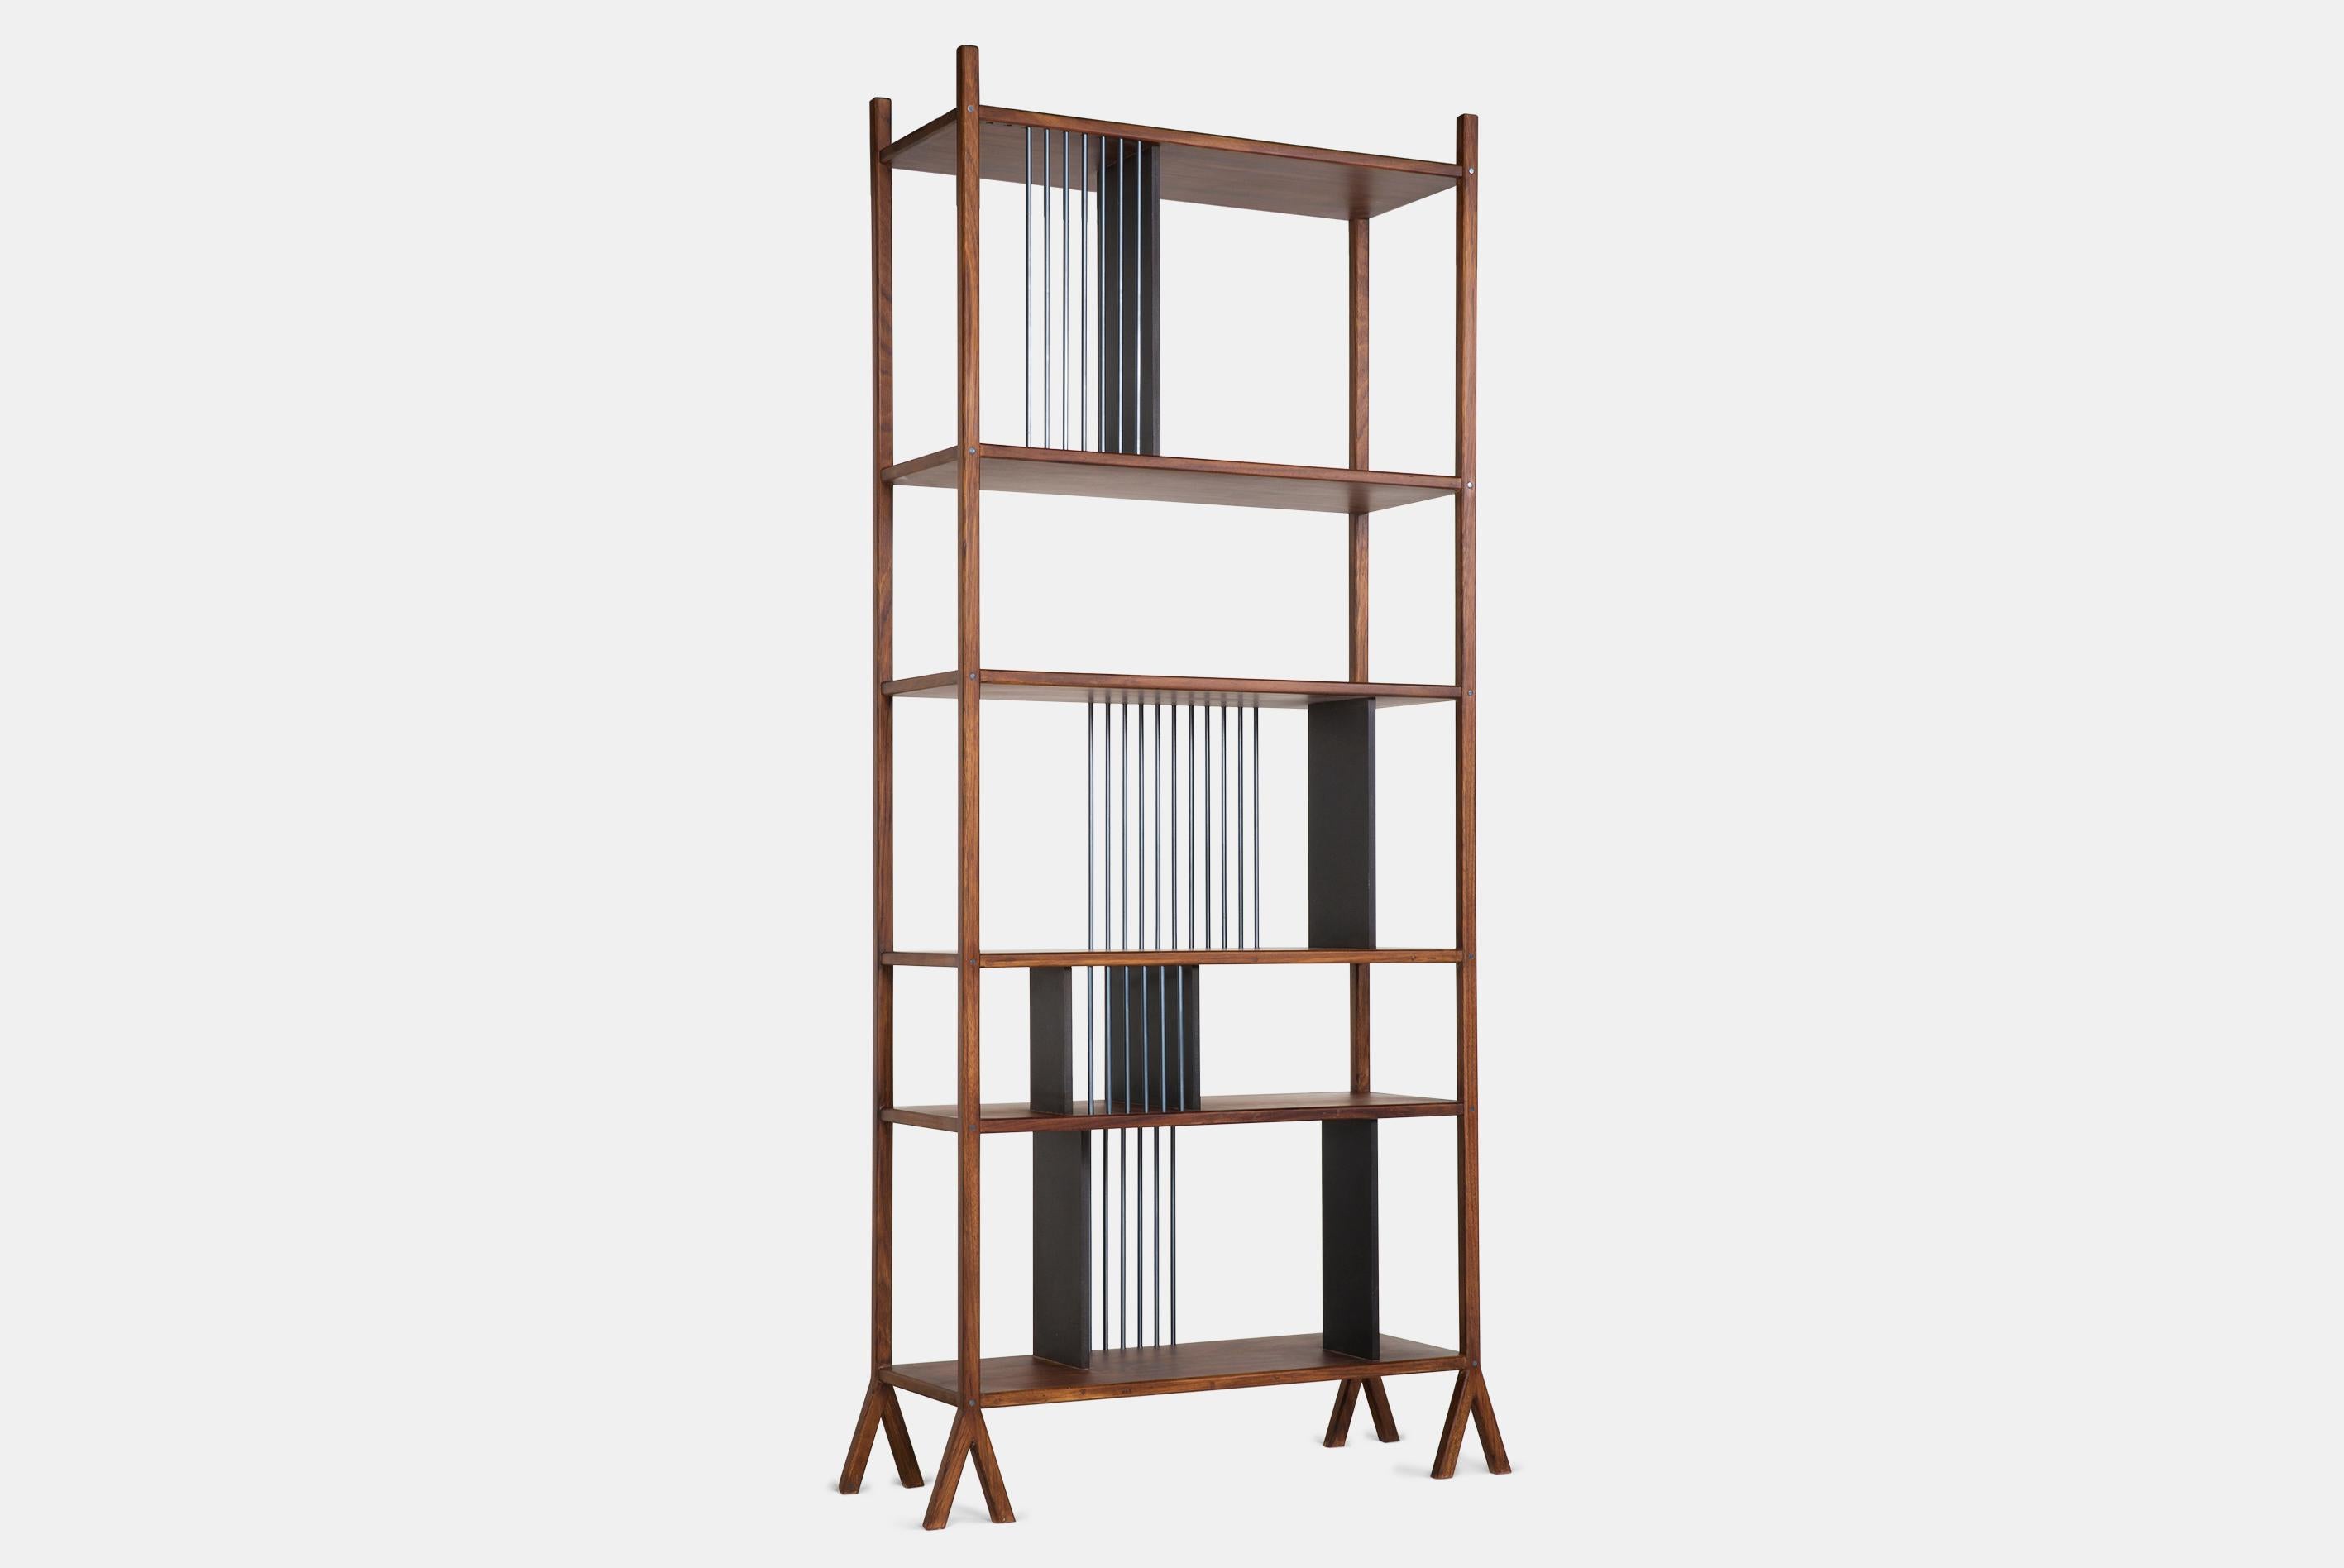 A multifunctional book shelf, with different finished materials which is modulated to create different pieces of different sizes to adapt to any space. The bookshelf is designed by the Mexican studio 